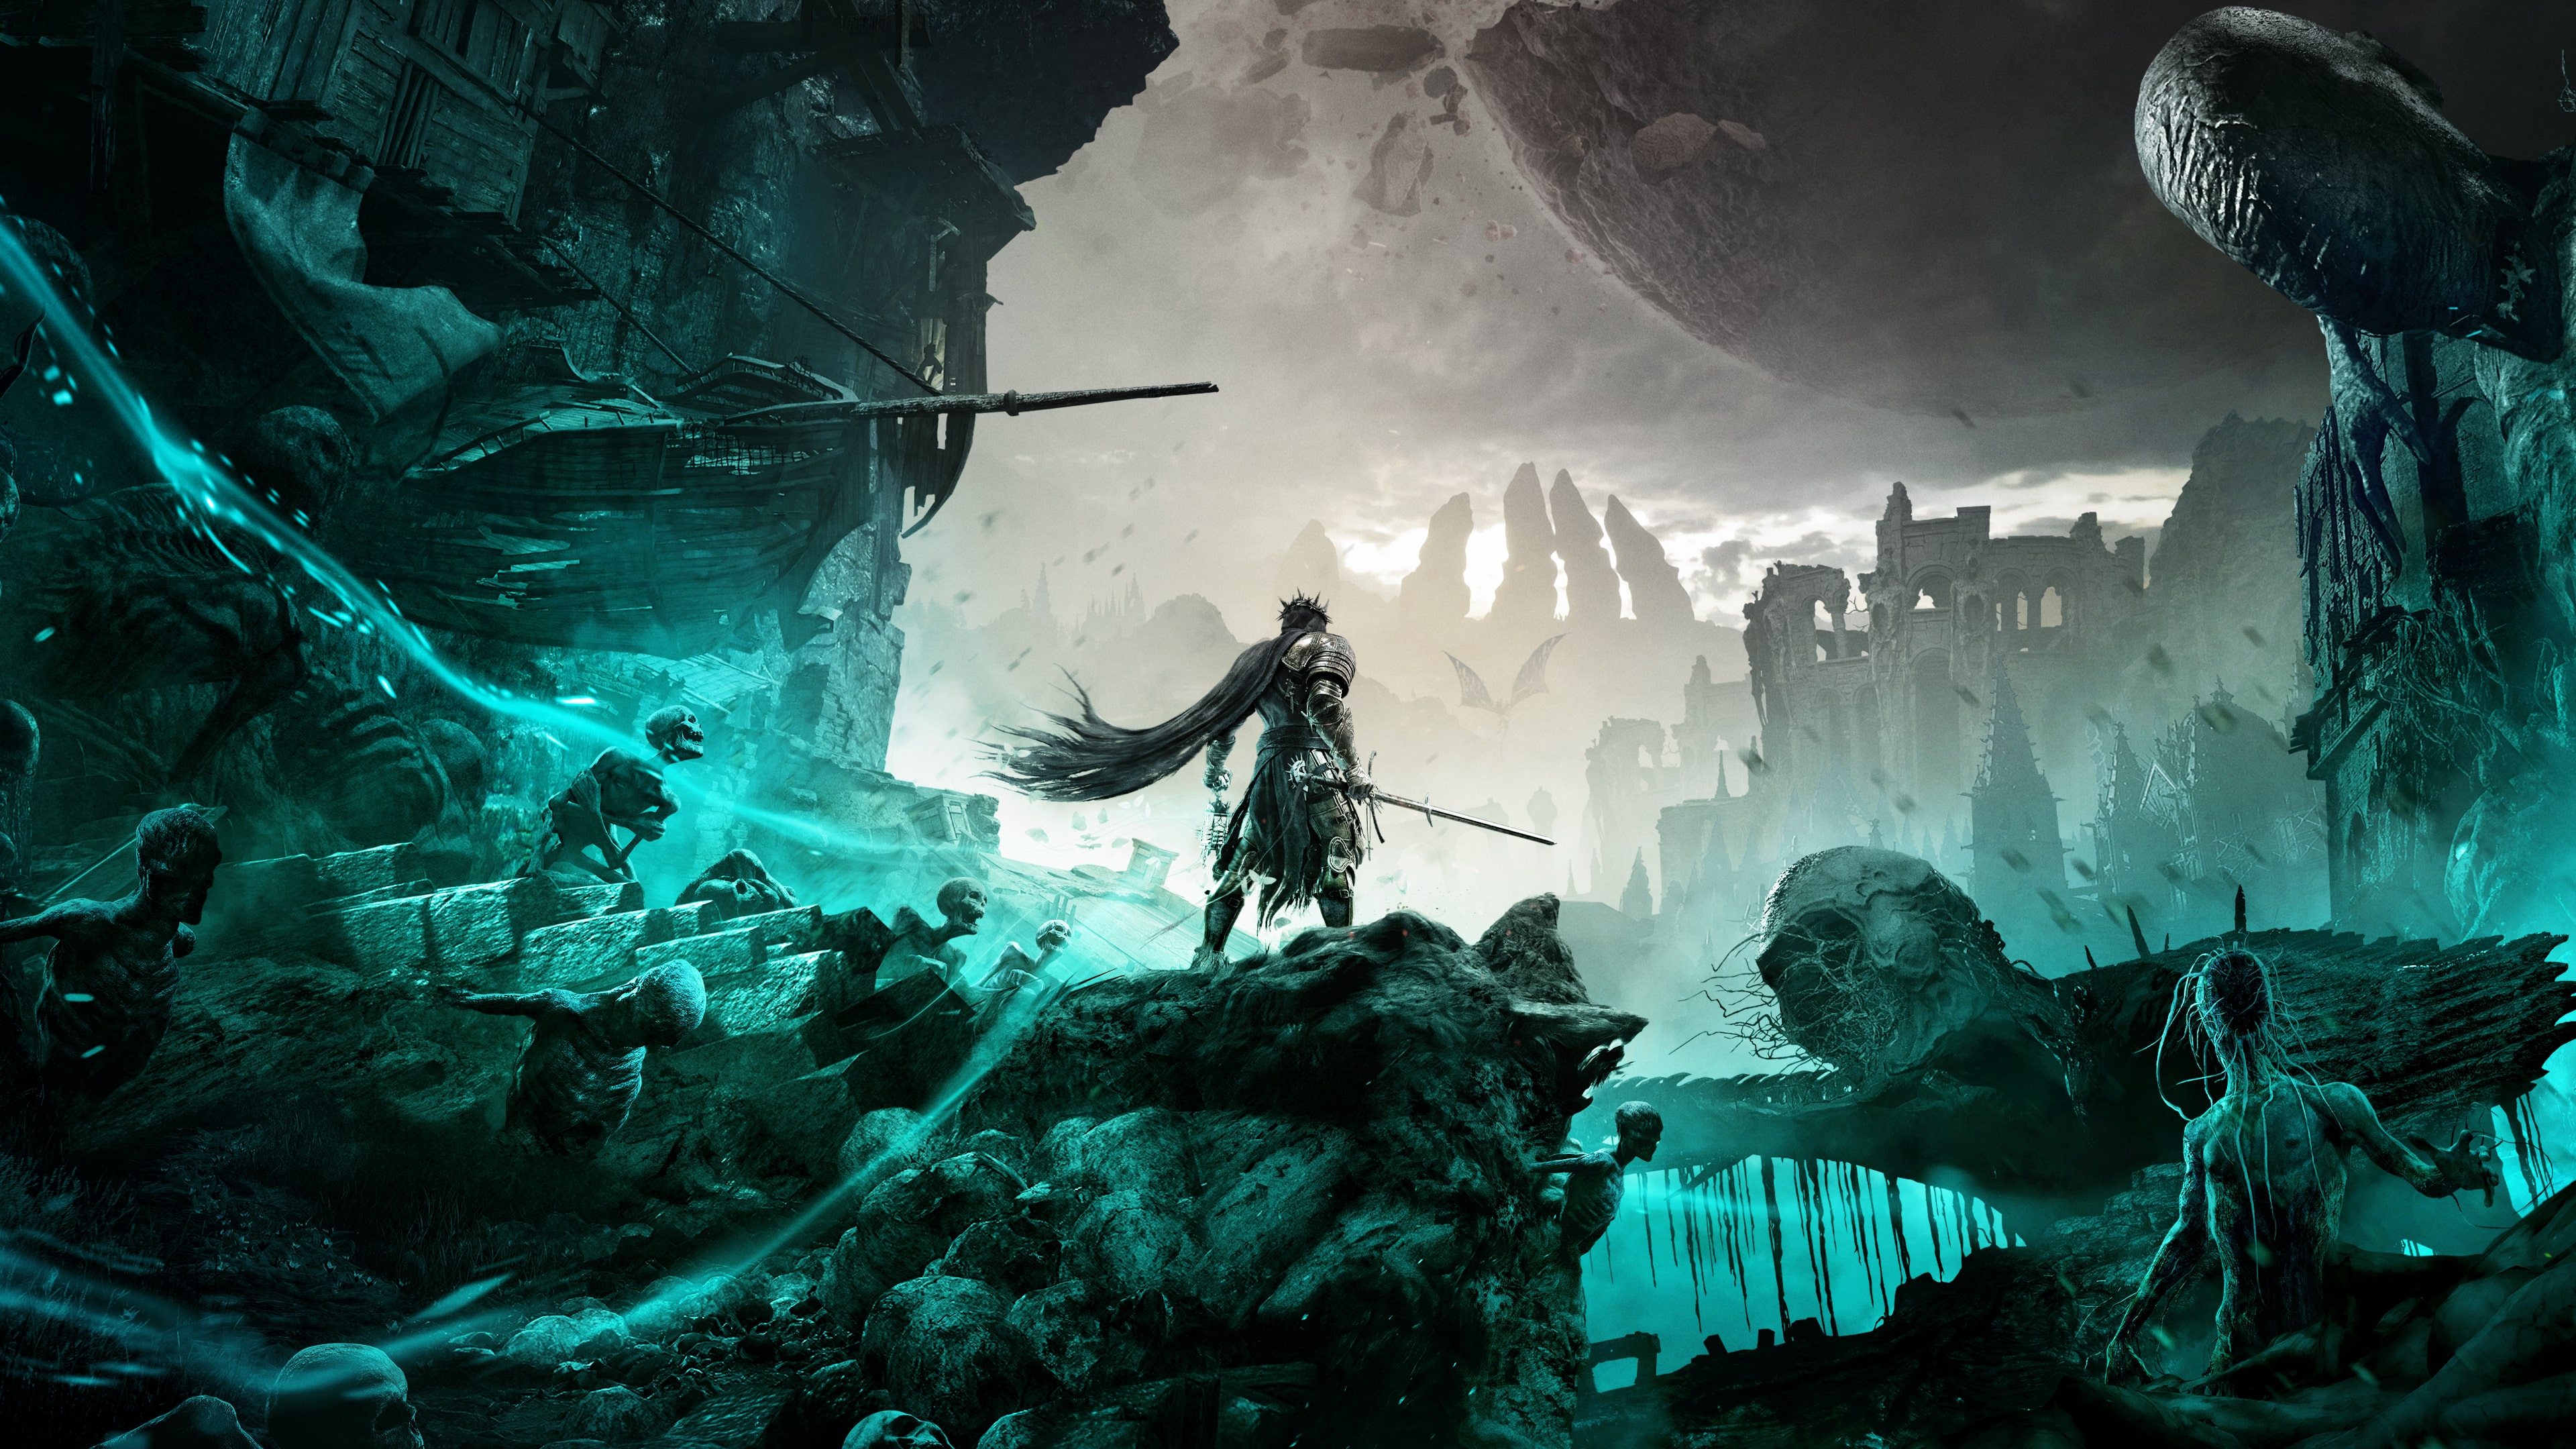 Lords of the Fallen Guide – 10 Tips and Tricks to Keep in Mind